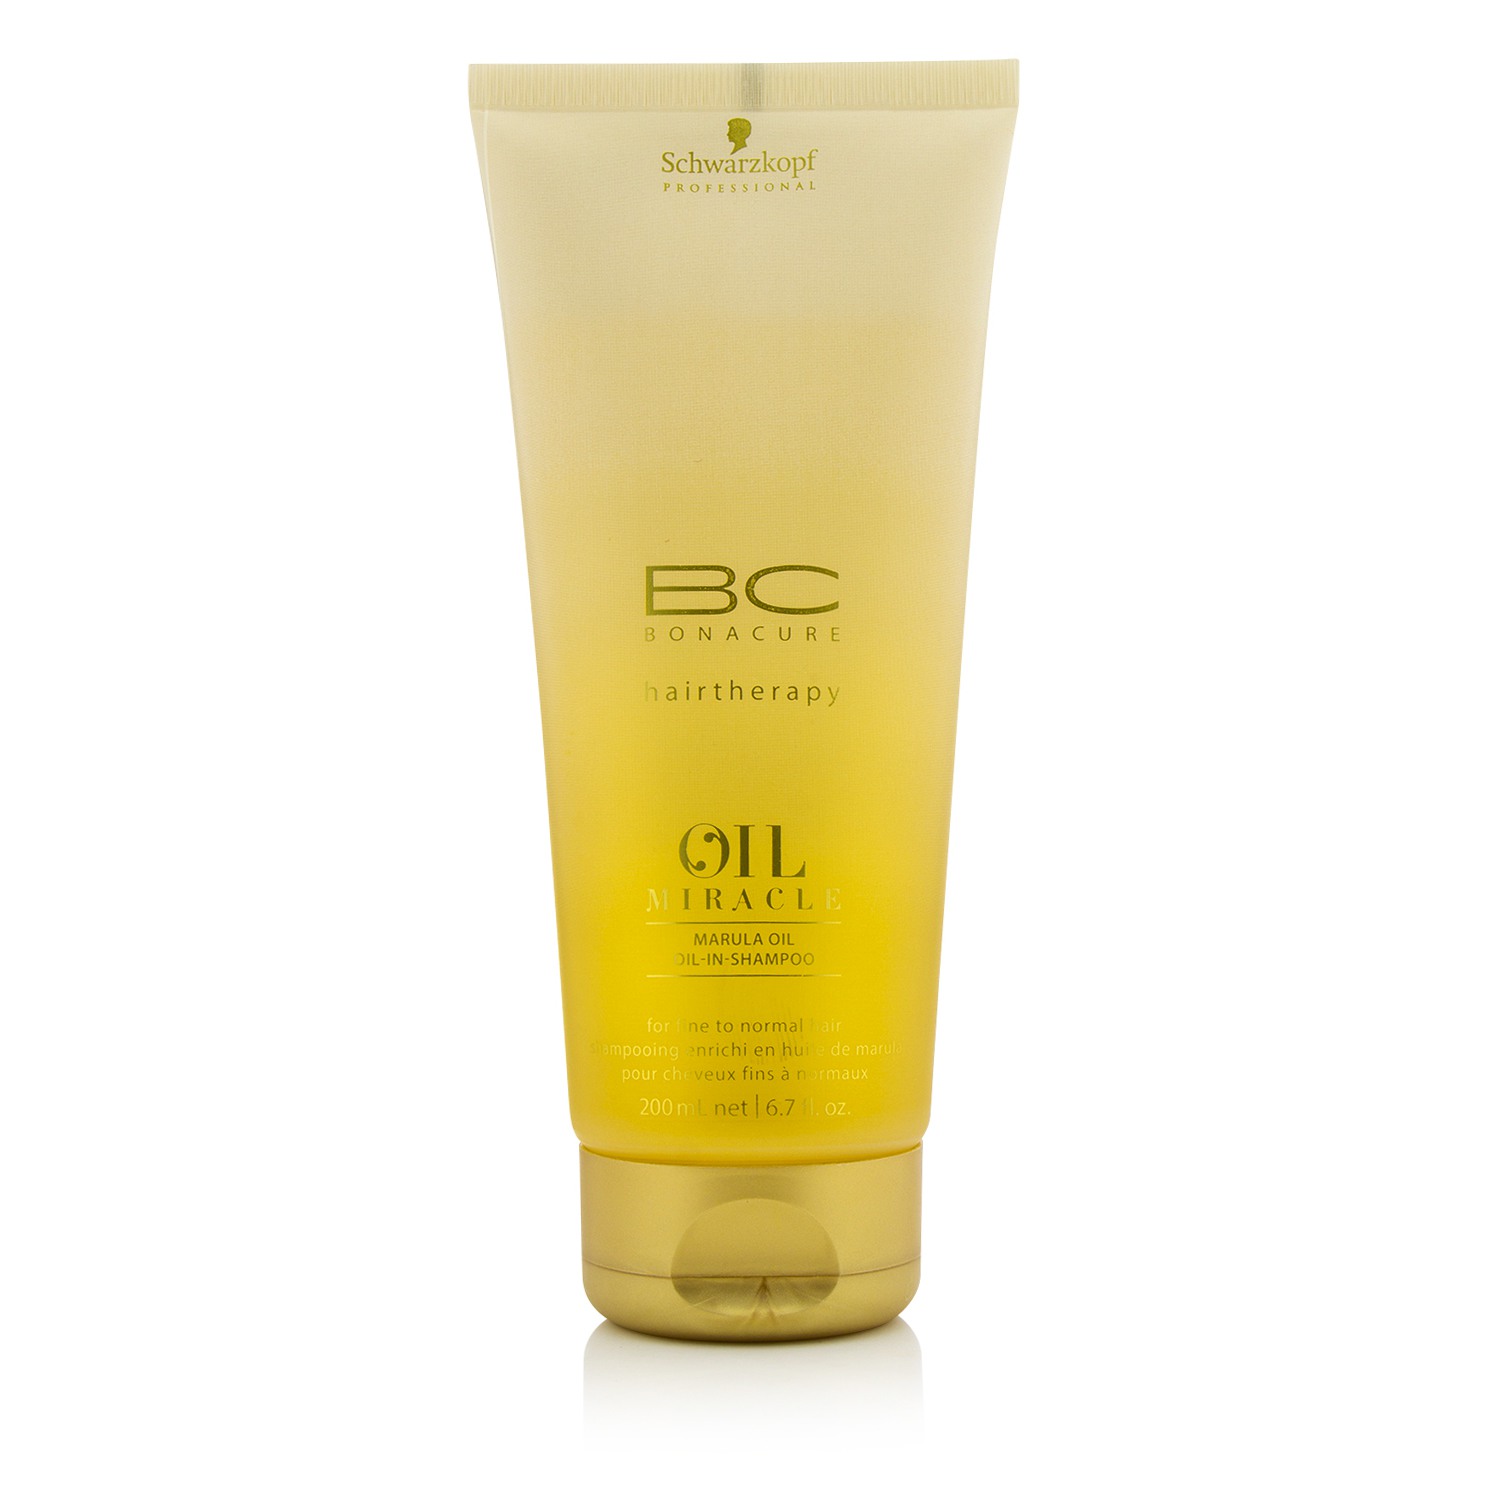 BC Oil Miracle Marula Oil Oil-In-Shampoo (For Fine to Normal Hair) Schwarzkopf Image